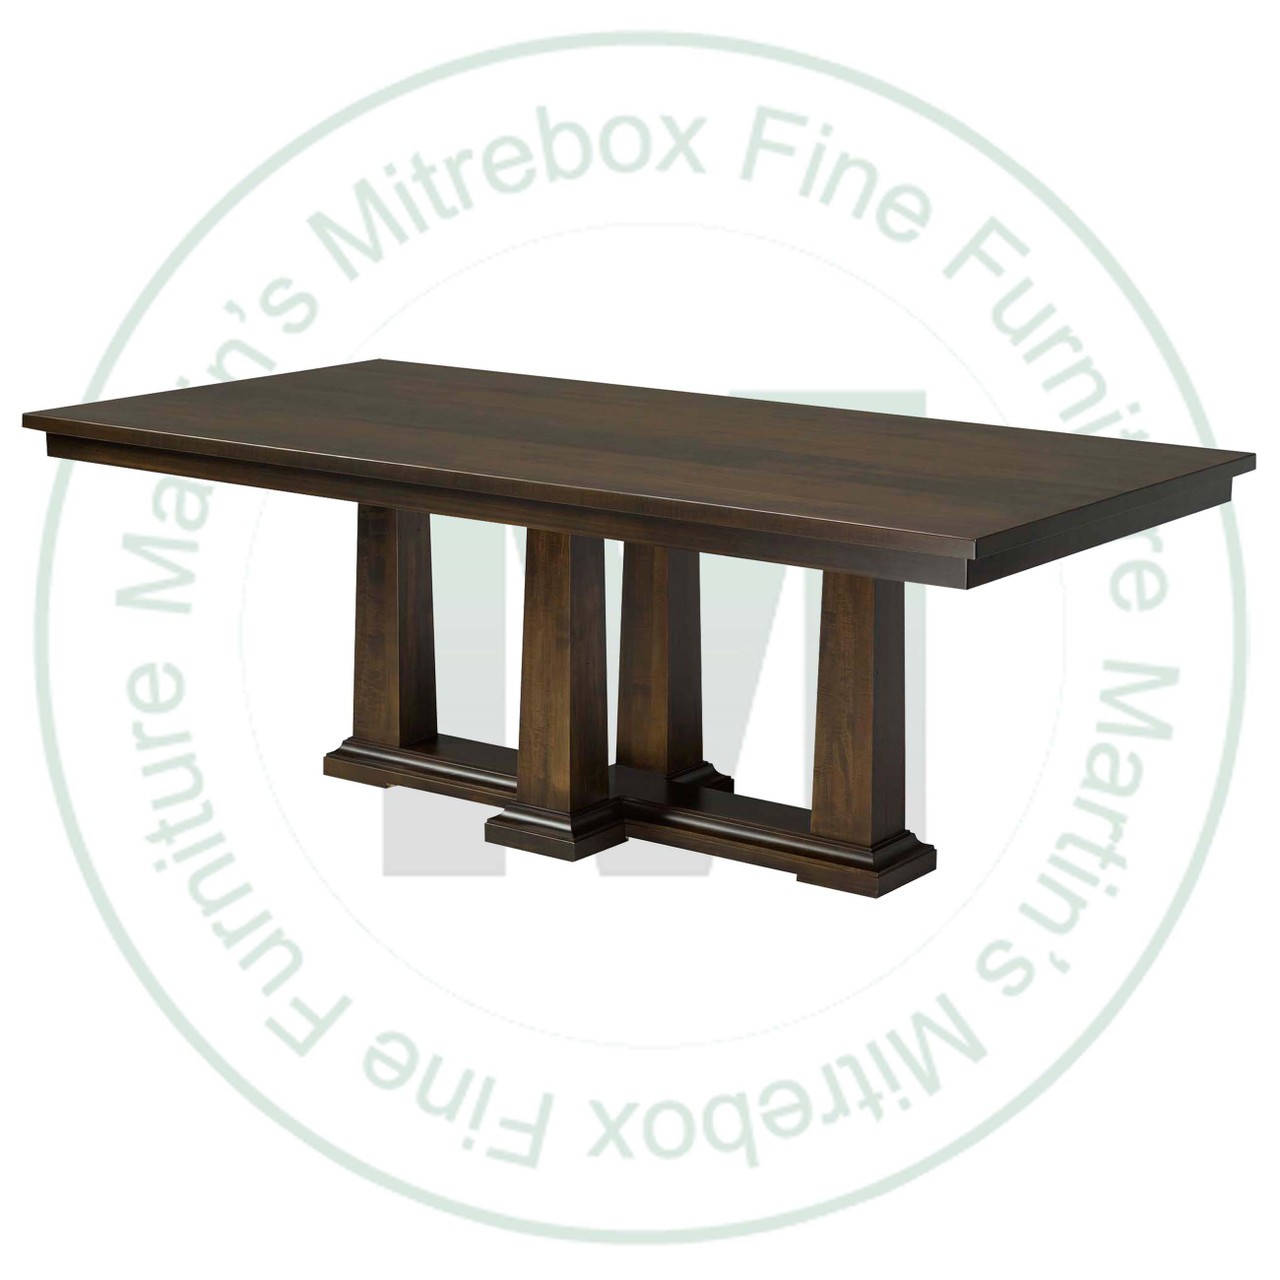 Maple Parthenon Double Pedestal Table 48''D x 96''W x 30''H Solid Top Table Has 1.25'' Thick Top